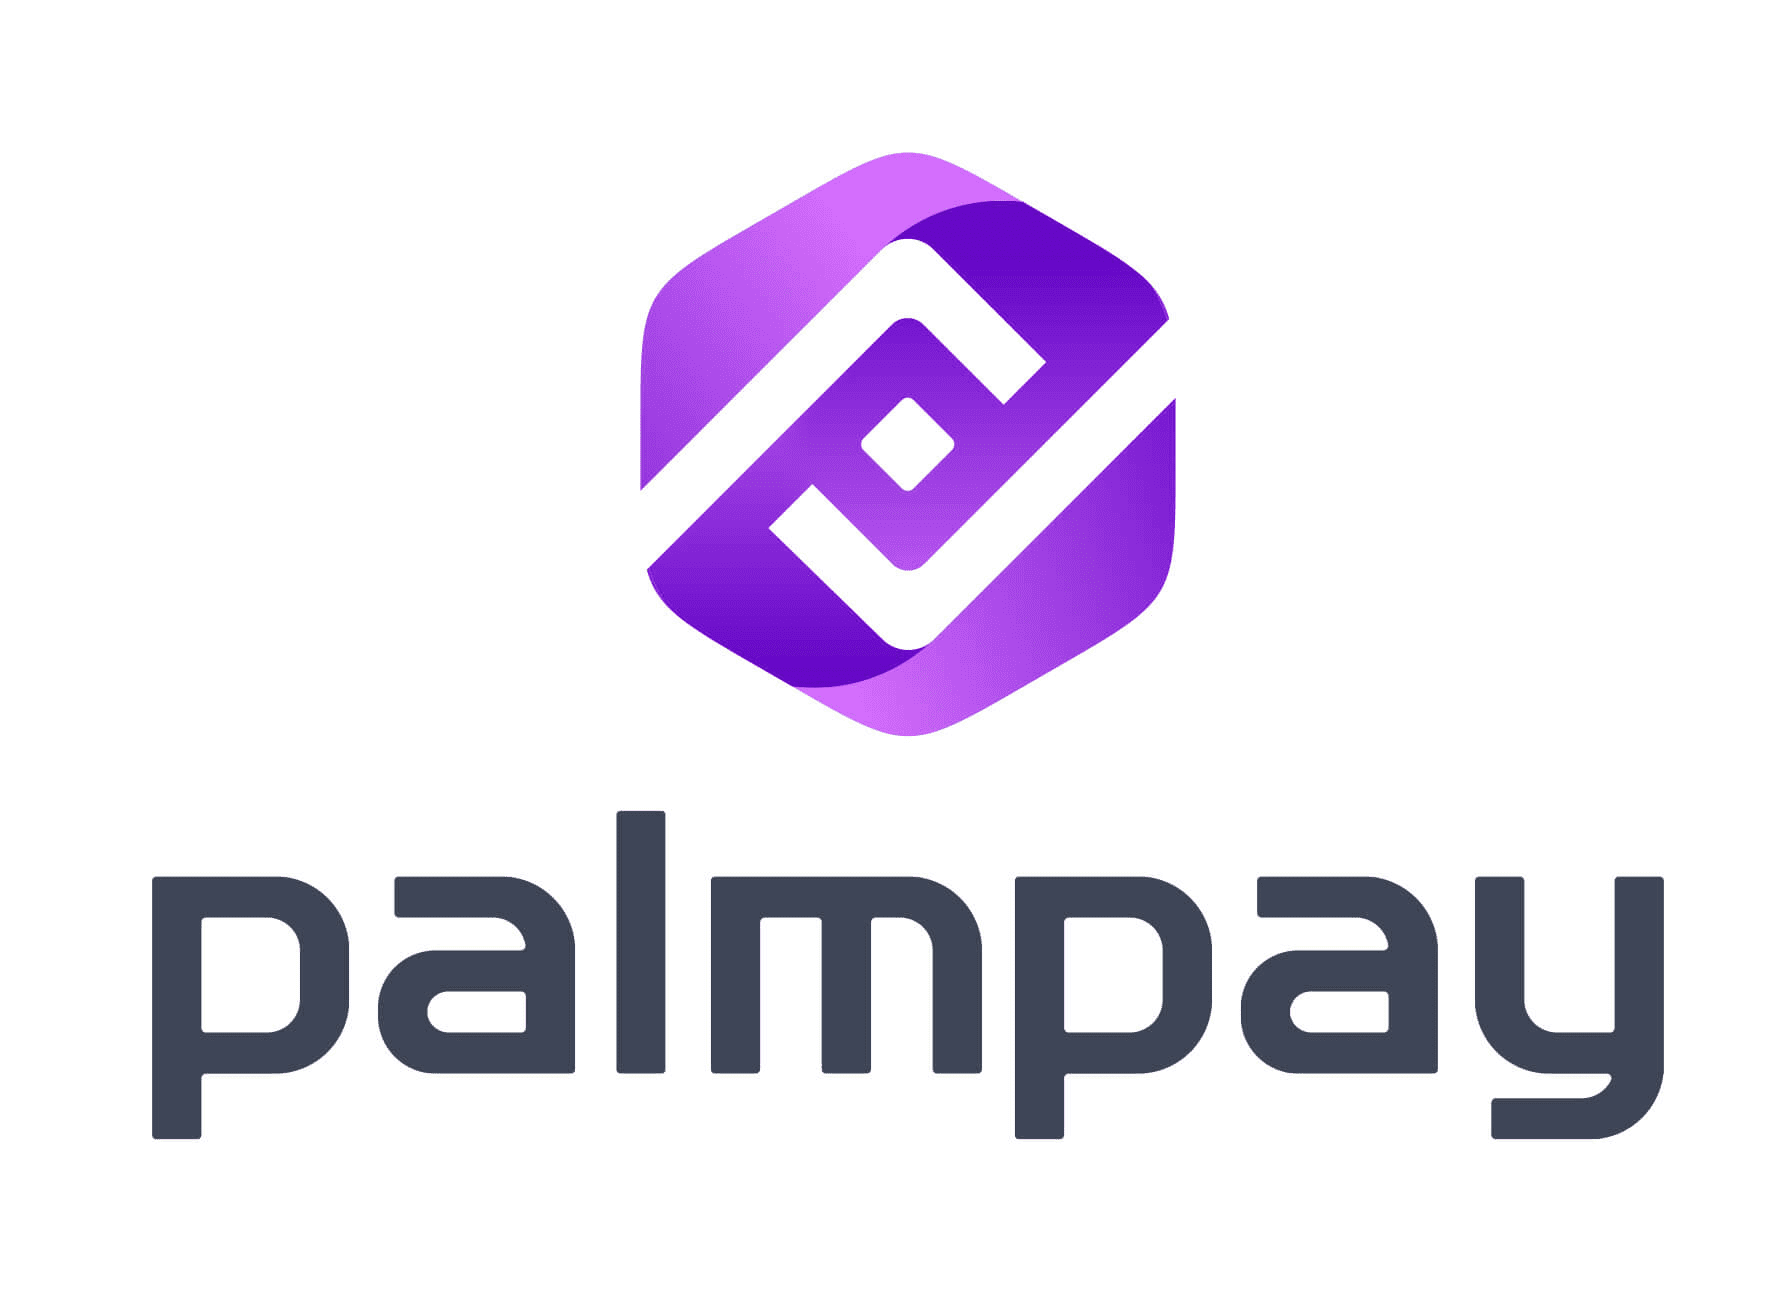 Africa-Focused Fintech PalmPay Growth Hits 25M Users, Reveals 20% Annual Interest Plan.